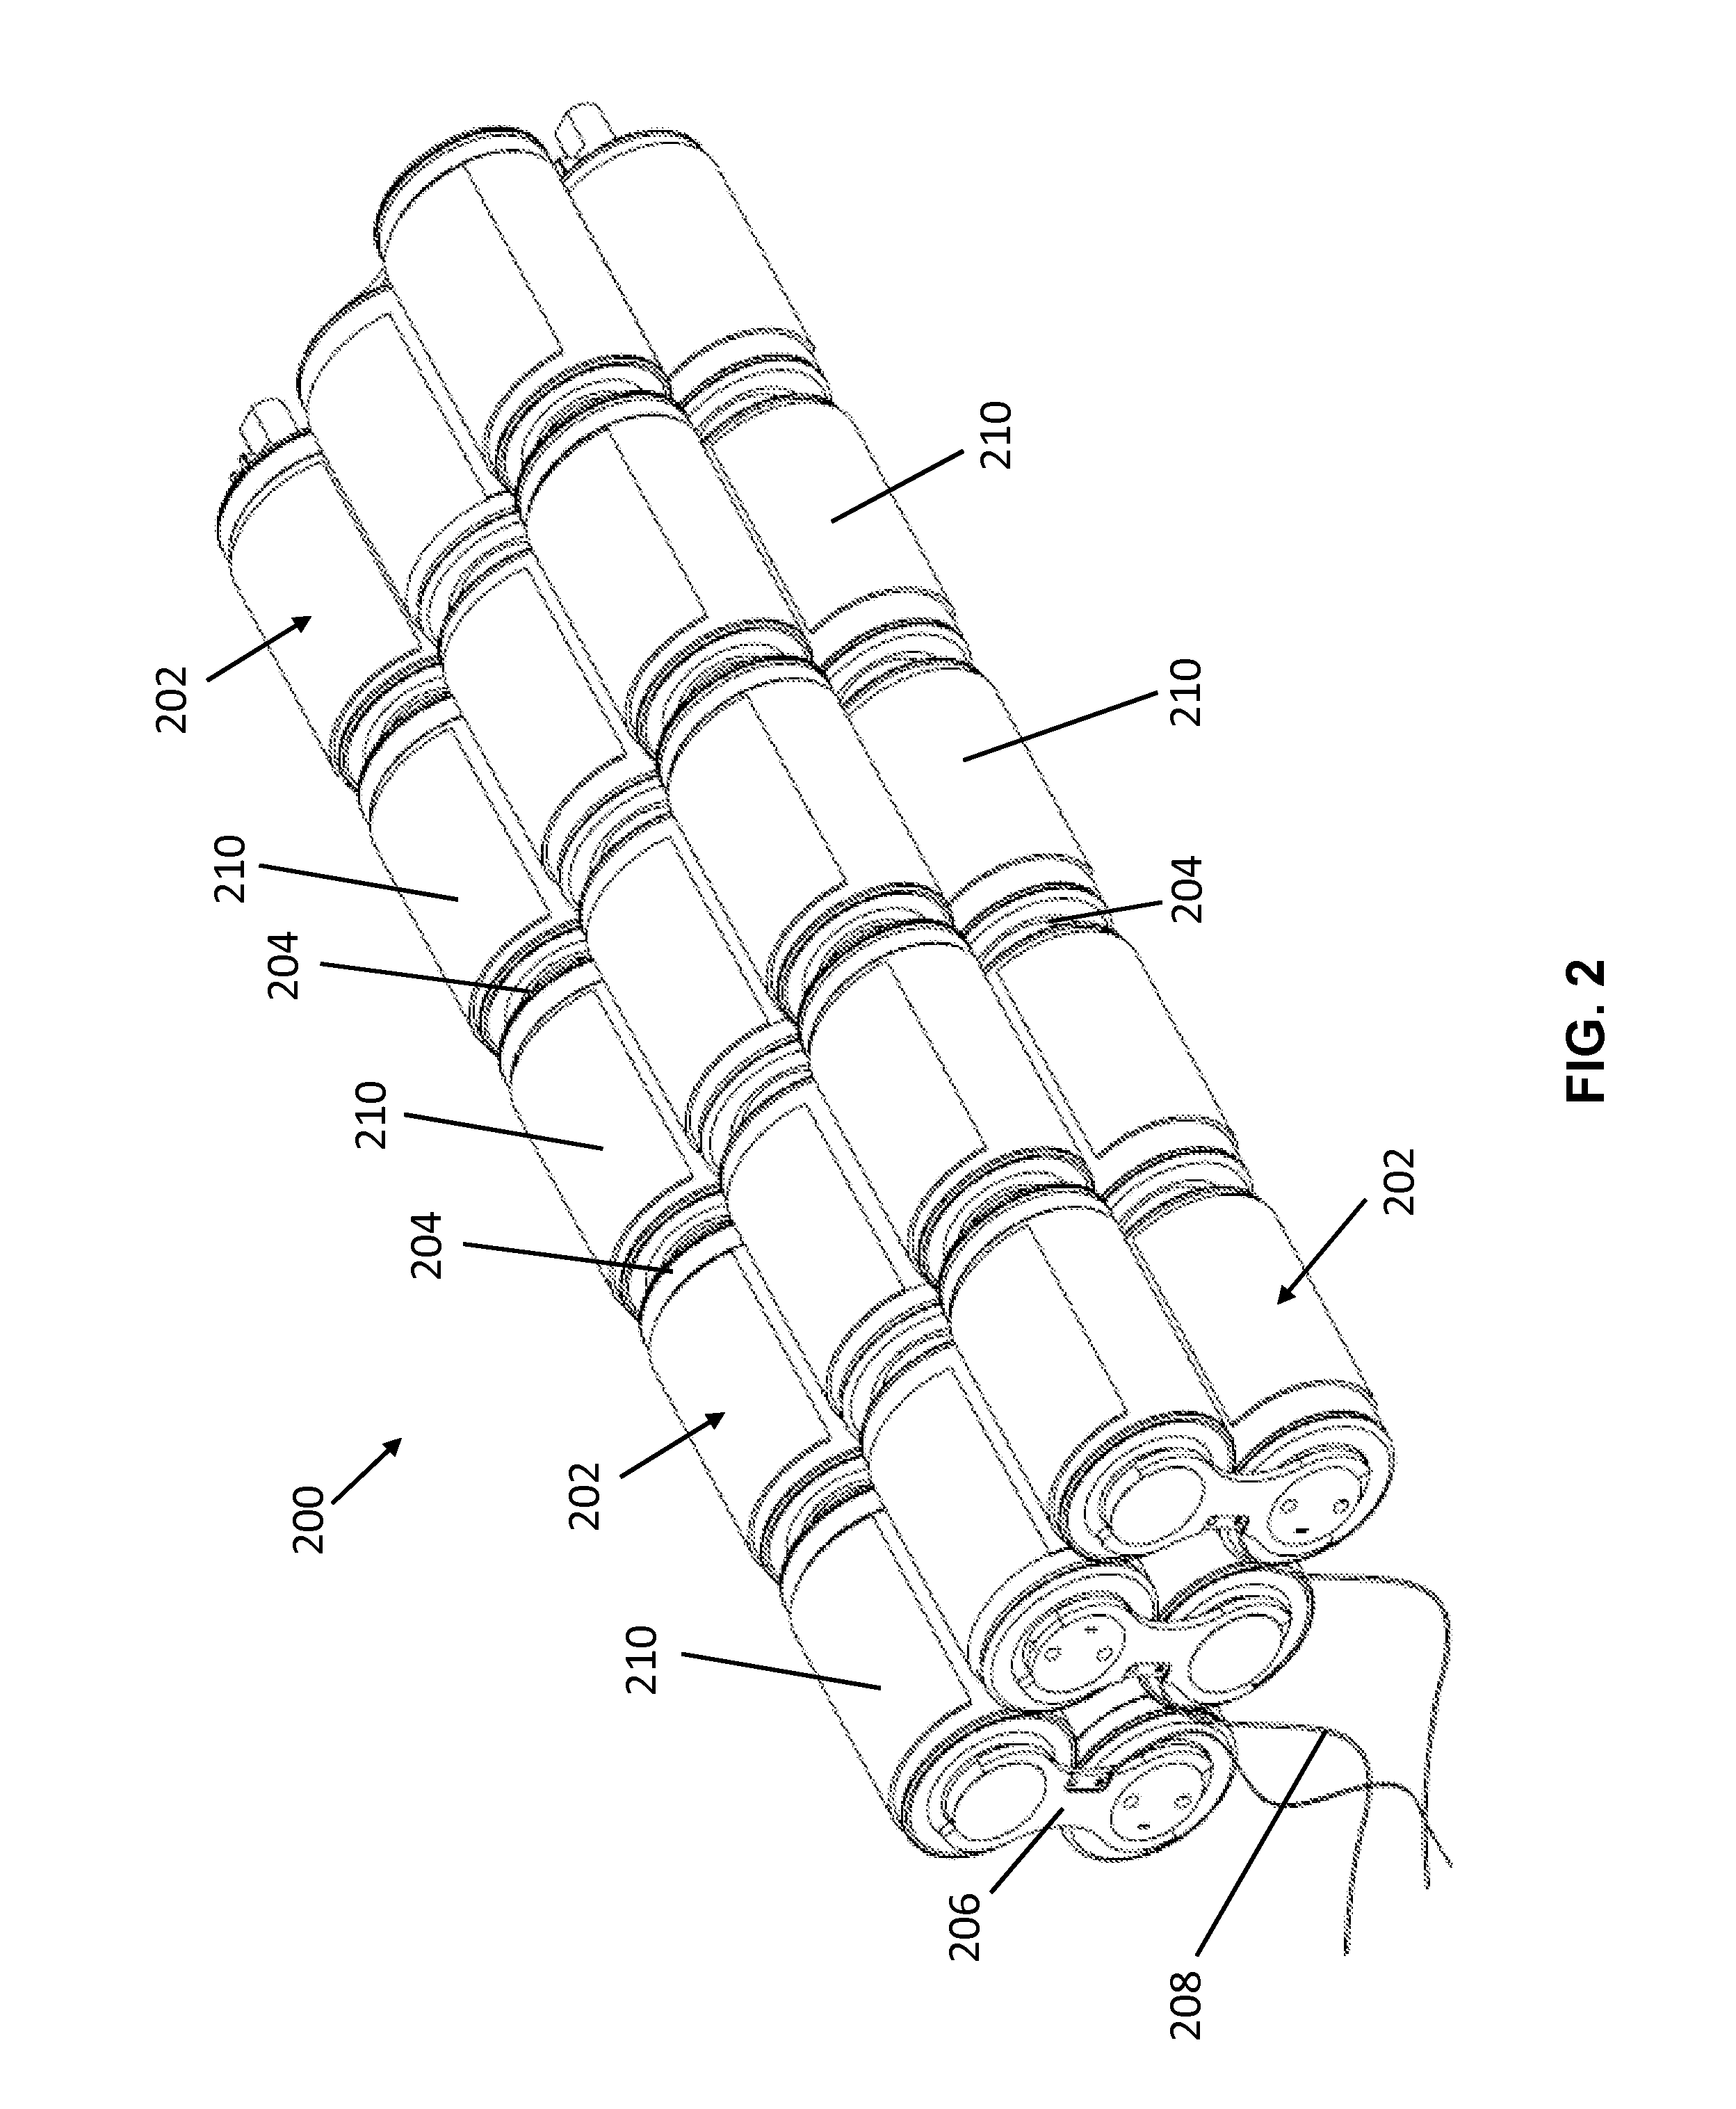 Apparatus for enclosing energy storage devices